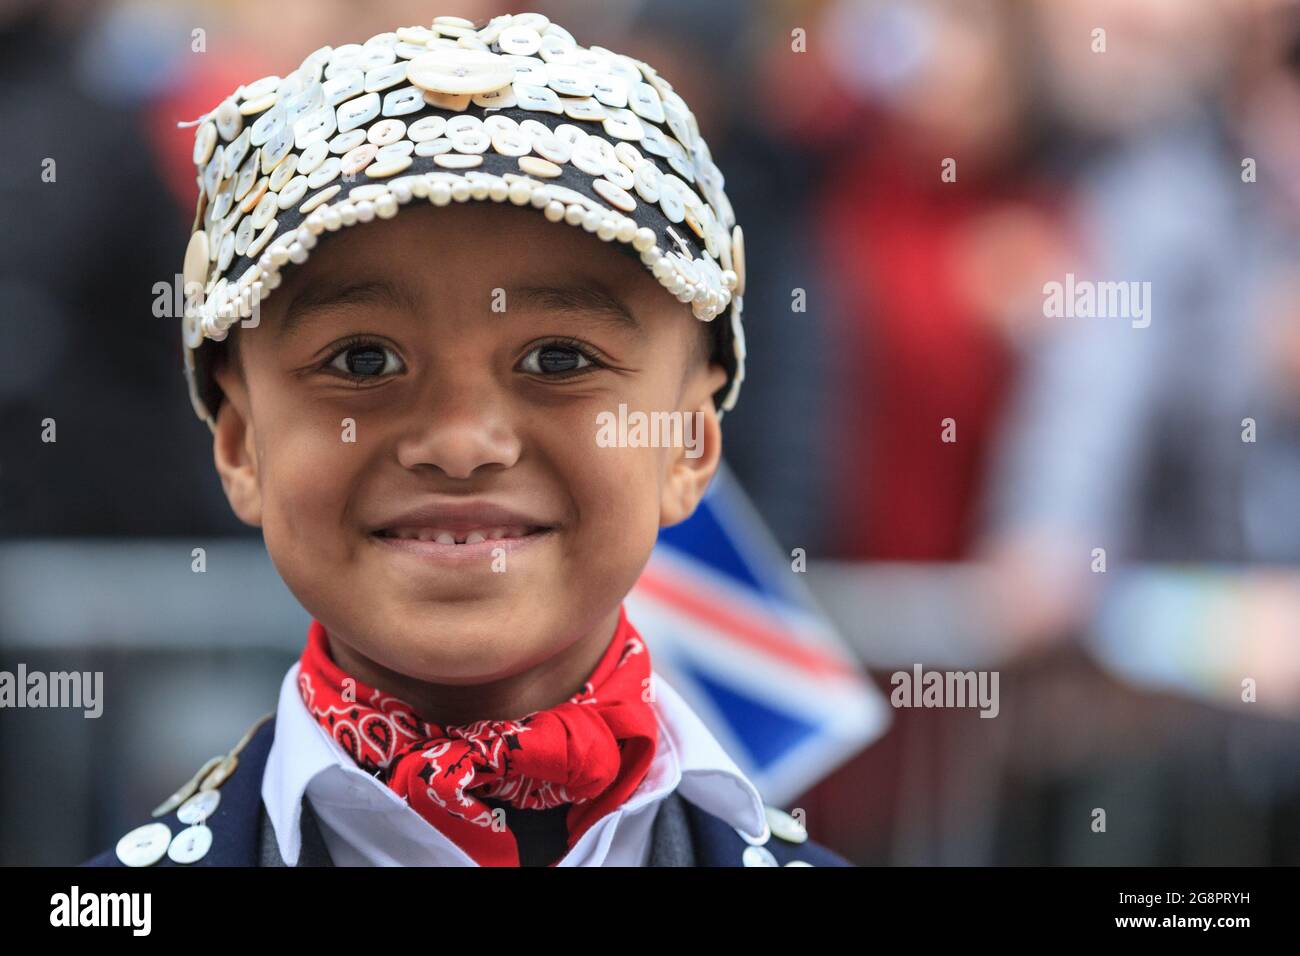 Der junge Pearly Prince of Highgate nimmt mit den Pearly Kings and Queens an der New Year's Day Parade in London, LNYDP, London, England, Großbritannien, Teil Stockfoto